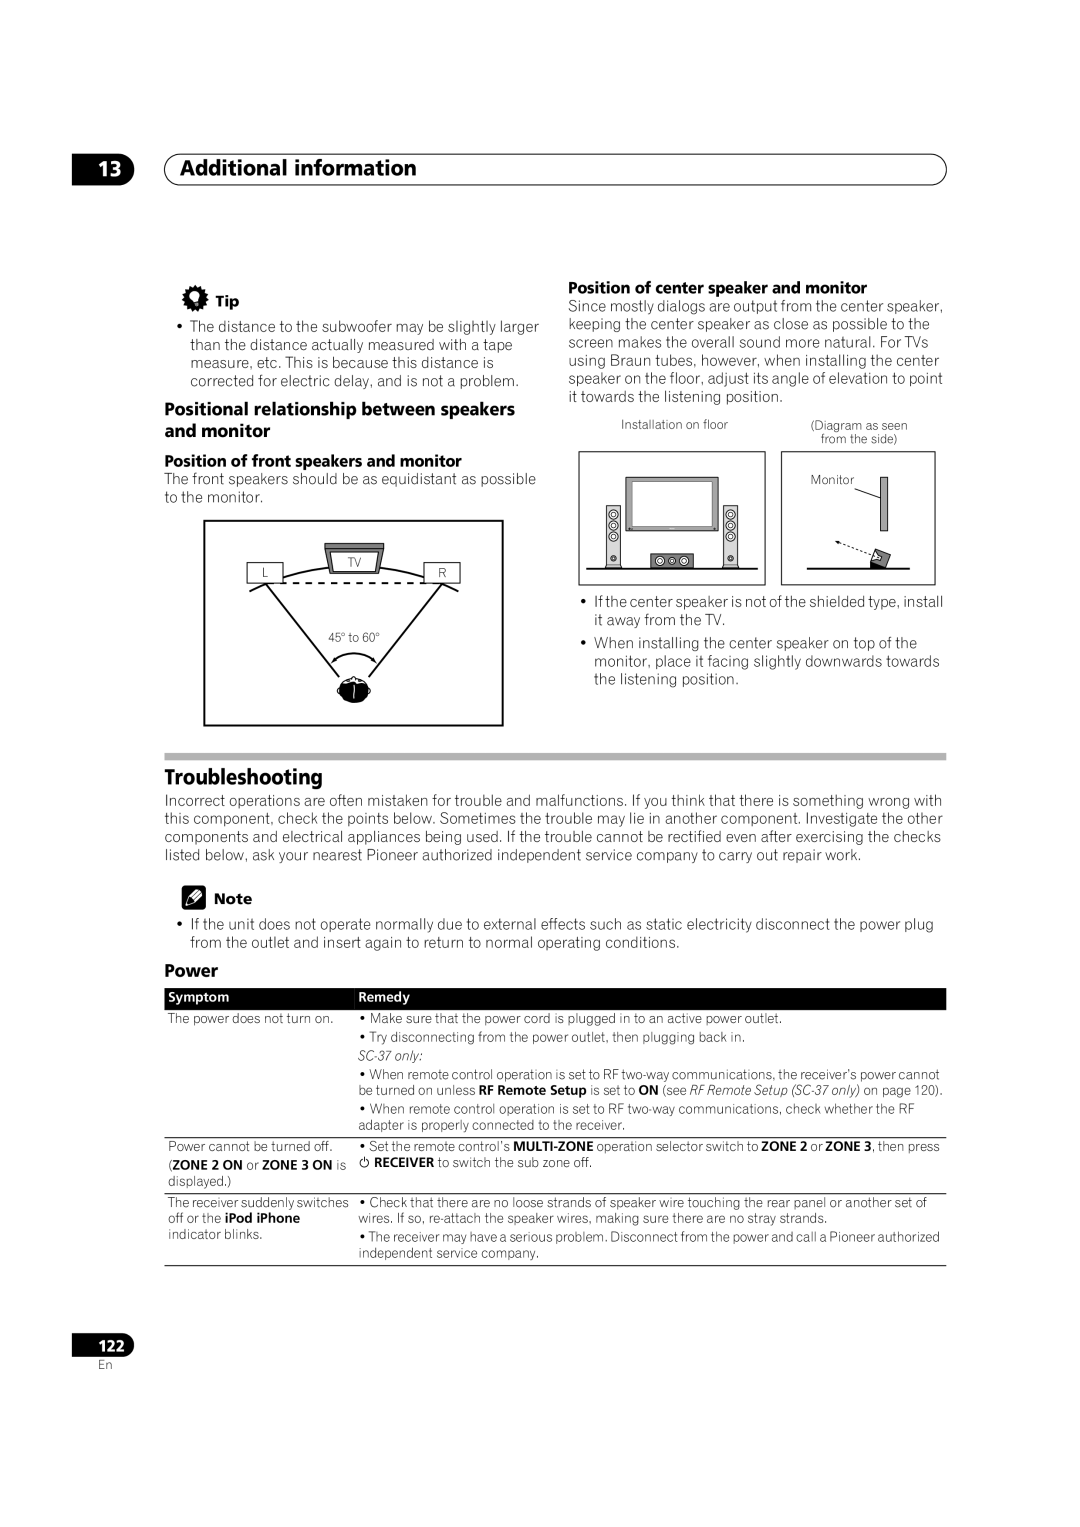 Pioneer SC-35 manual 13Additional information, Troubleshooting, Power, Position of front speakers and monitor 